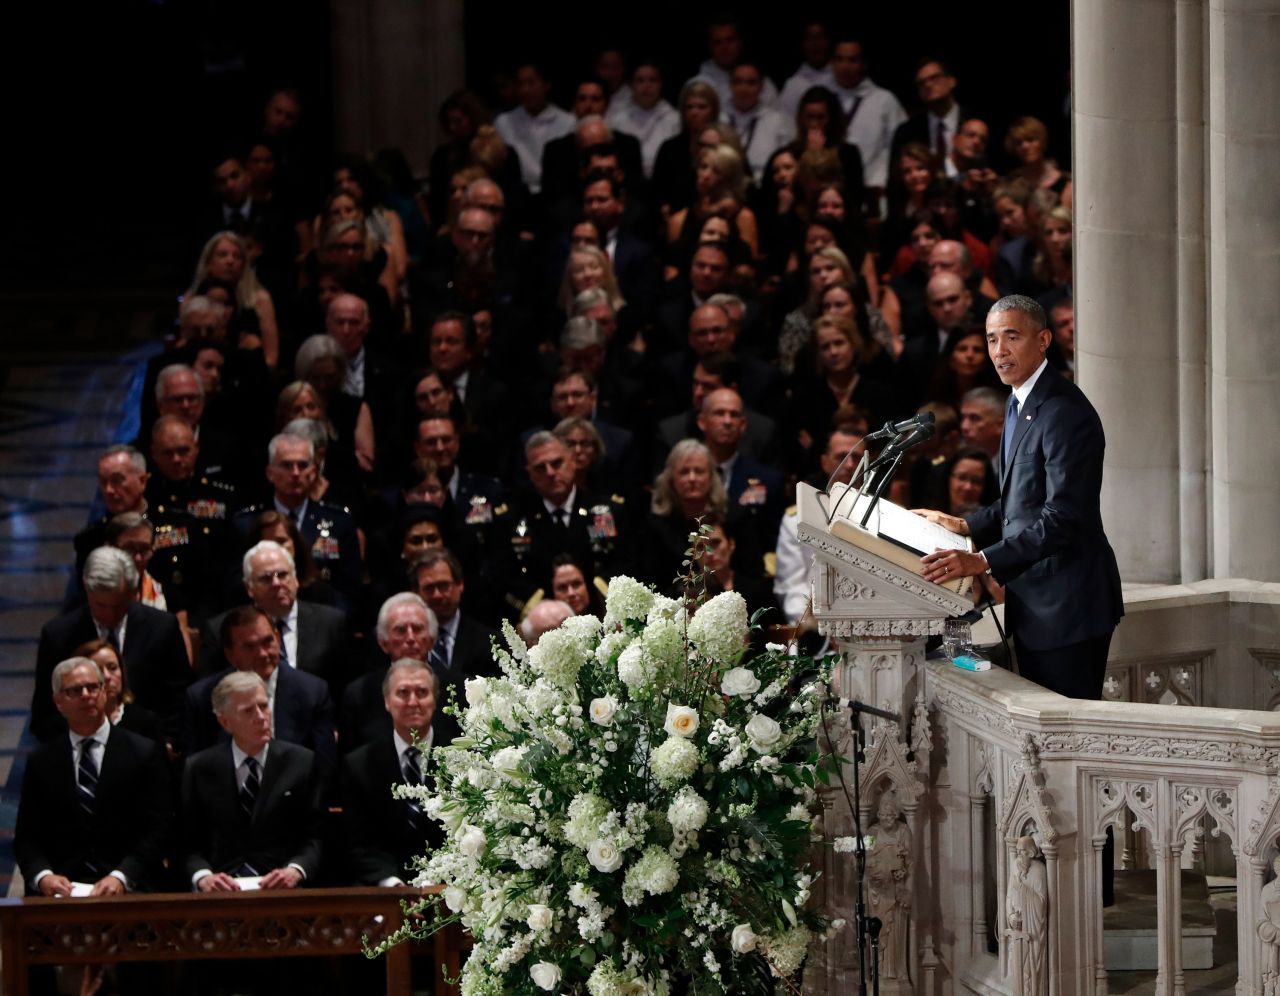 Former President Barack Obama delivered a eulogy and <a href="https://www.cnn.com/2018/09/01/politics/obama-eulogy-john-mccain-funeral/index.html" target="_blank">praised McCain's efforts</a> to push the nation to rise above "mean and petty" politics. "So much of our politics, our public life, our public discourse can seem small and mean and petty, trafficking in bombast and insult, and phony controversies, and manufactured outrage," Obama said. "It's a politics that pretends to be brave and tough, but in fact is born of fear. John called on us to be bigger than that. He called on us to be better than that."